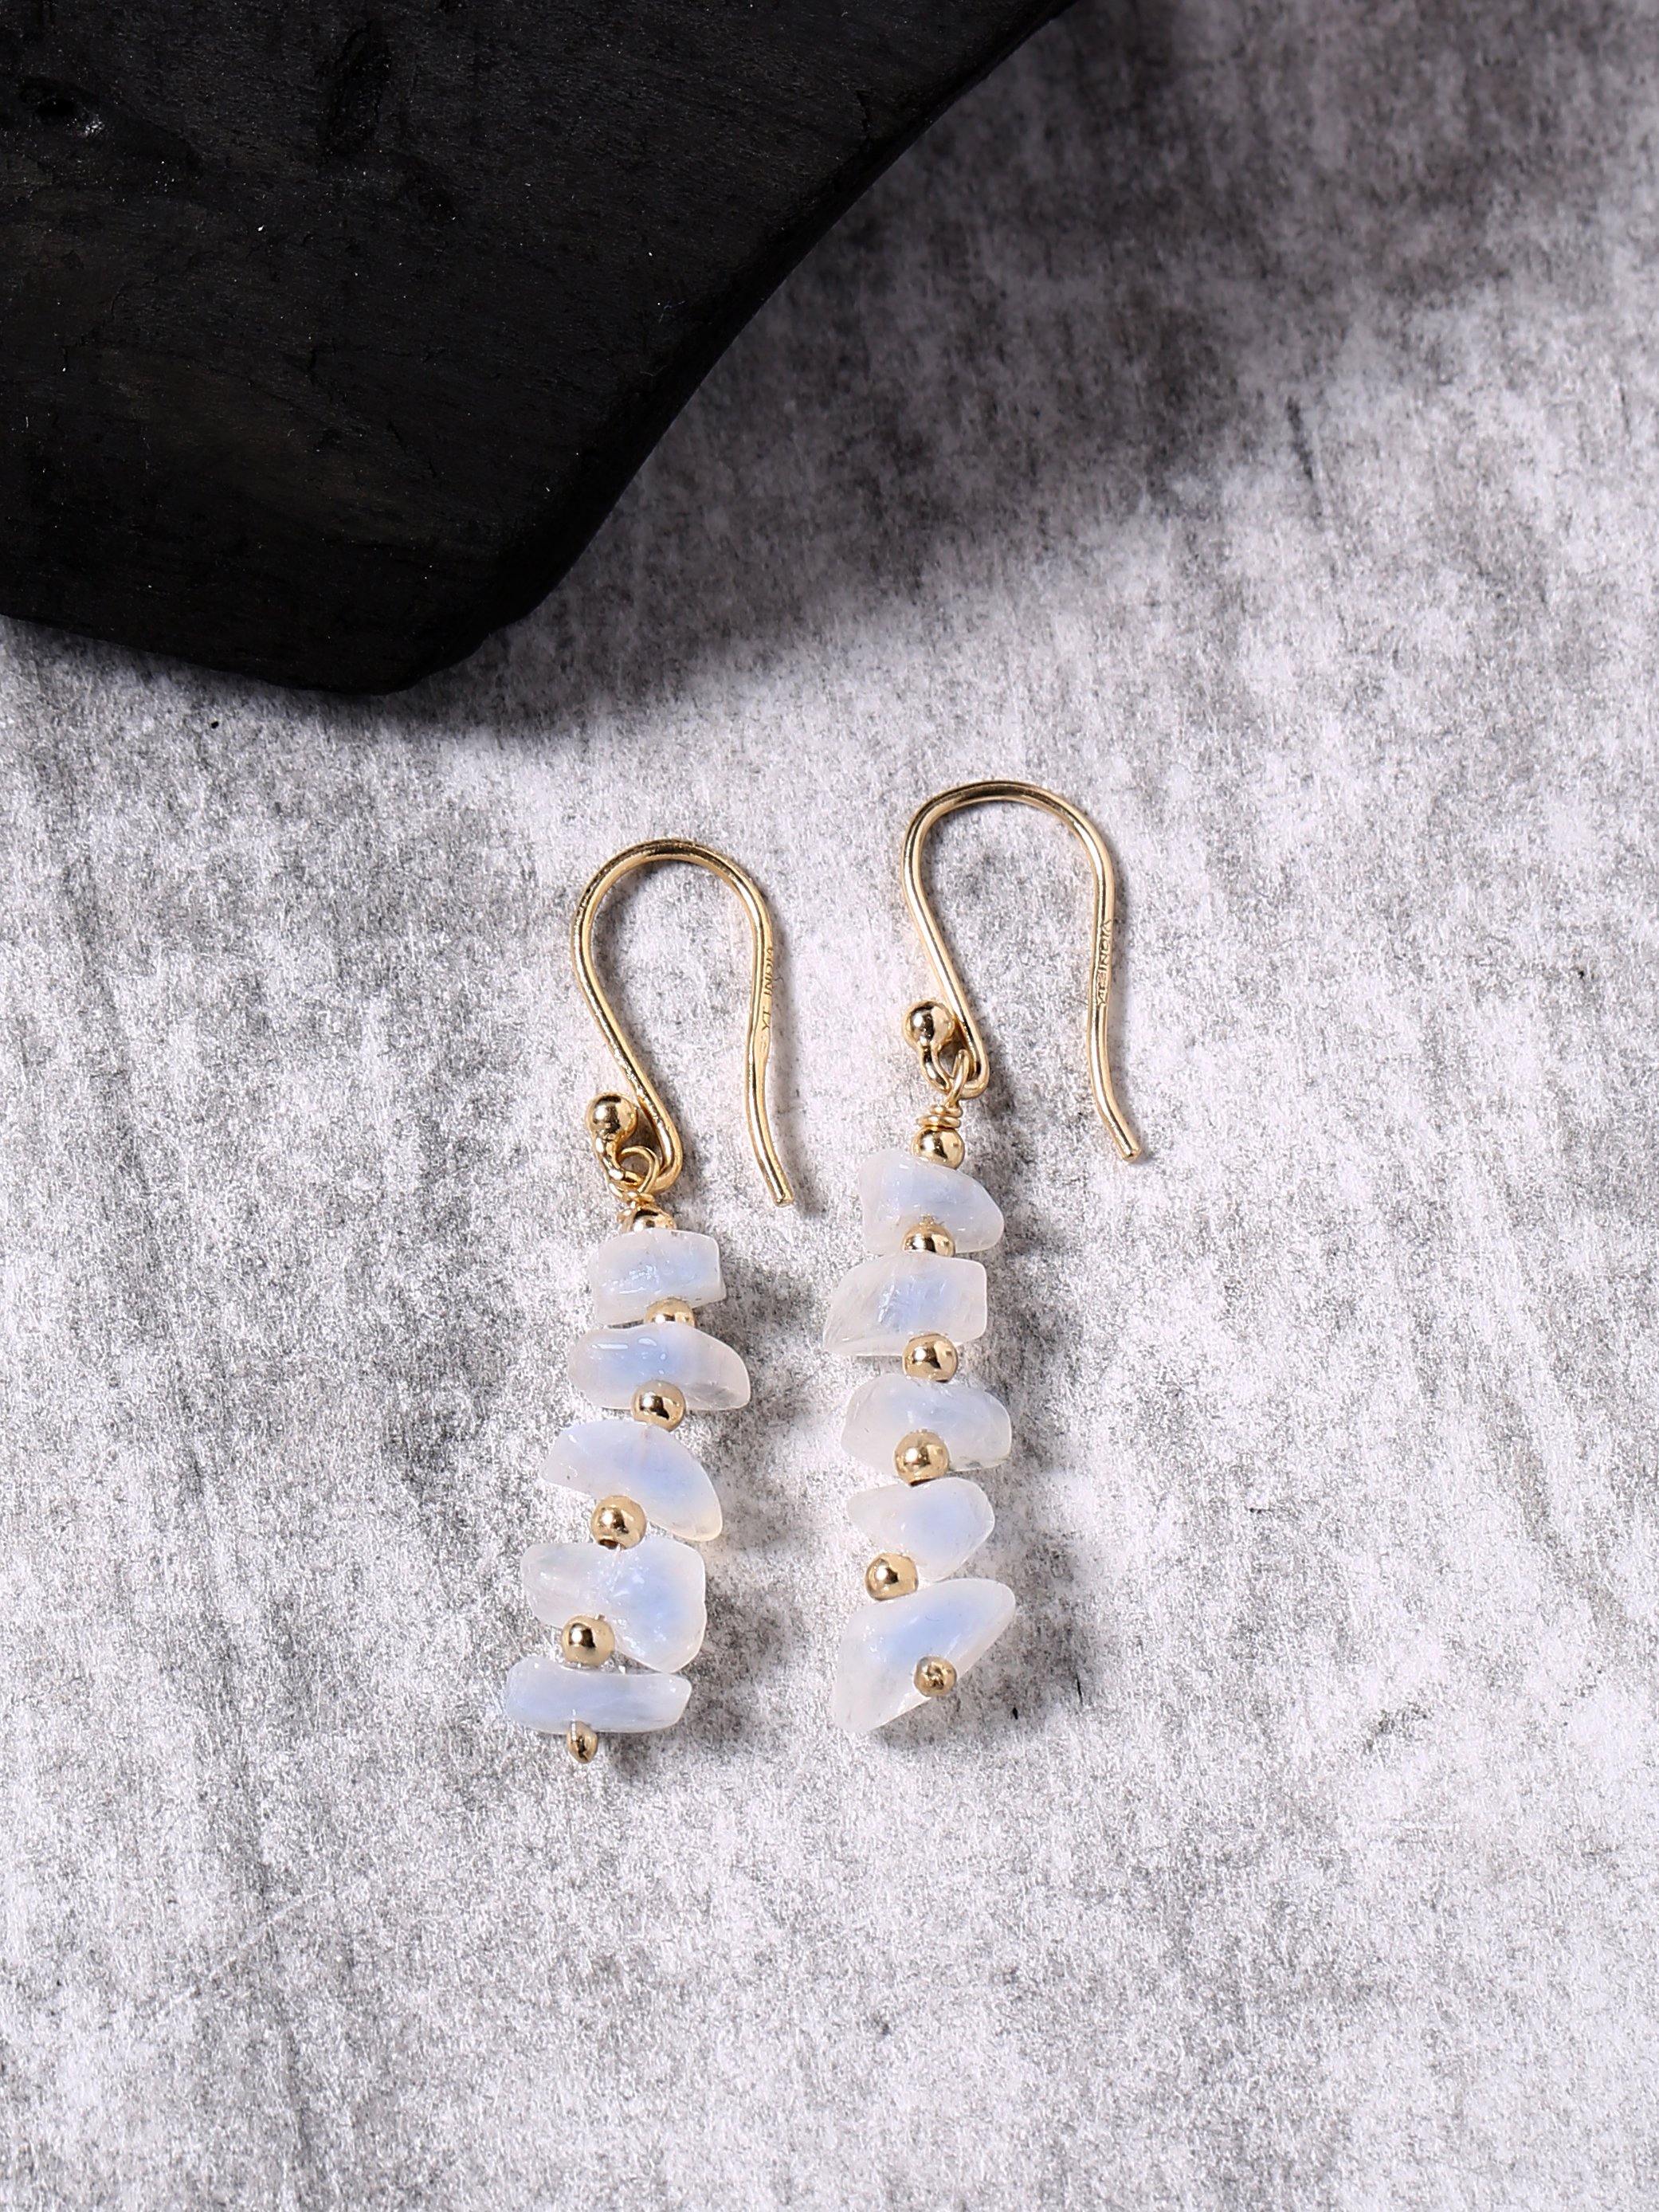 Moonstone Solid 925 Silver Gold Plated Dangle Earrings Jewelry - YoTreasure